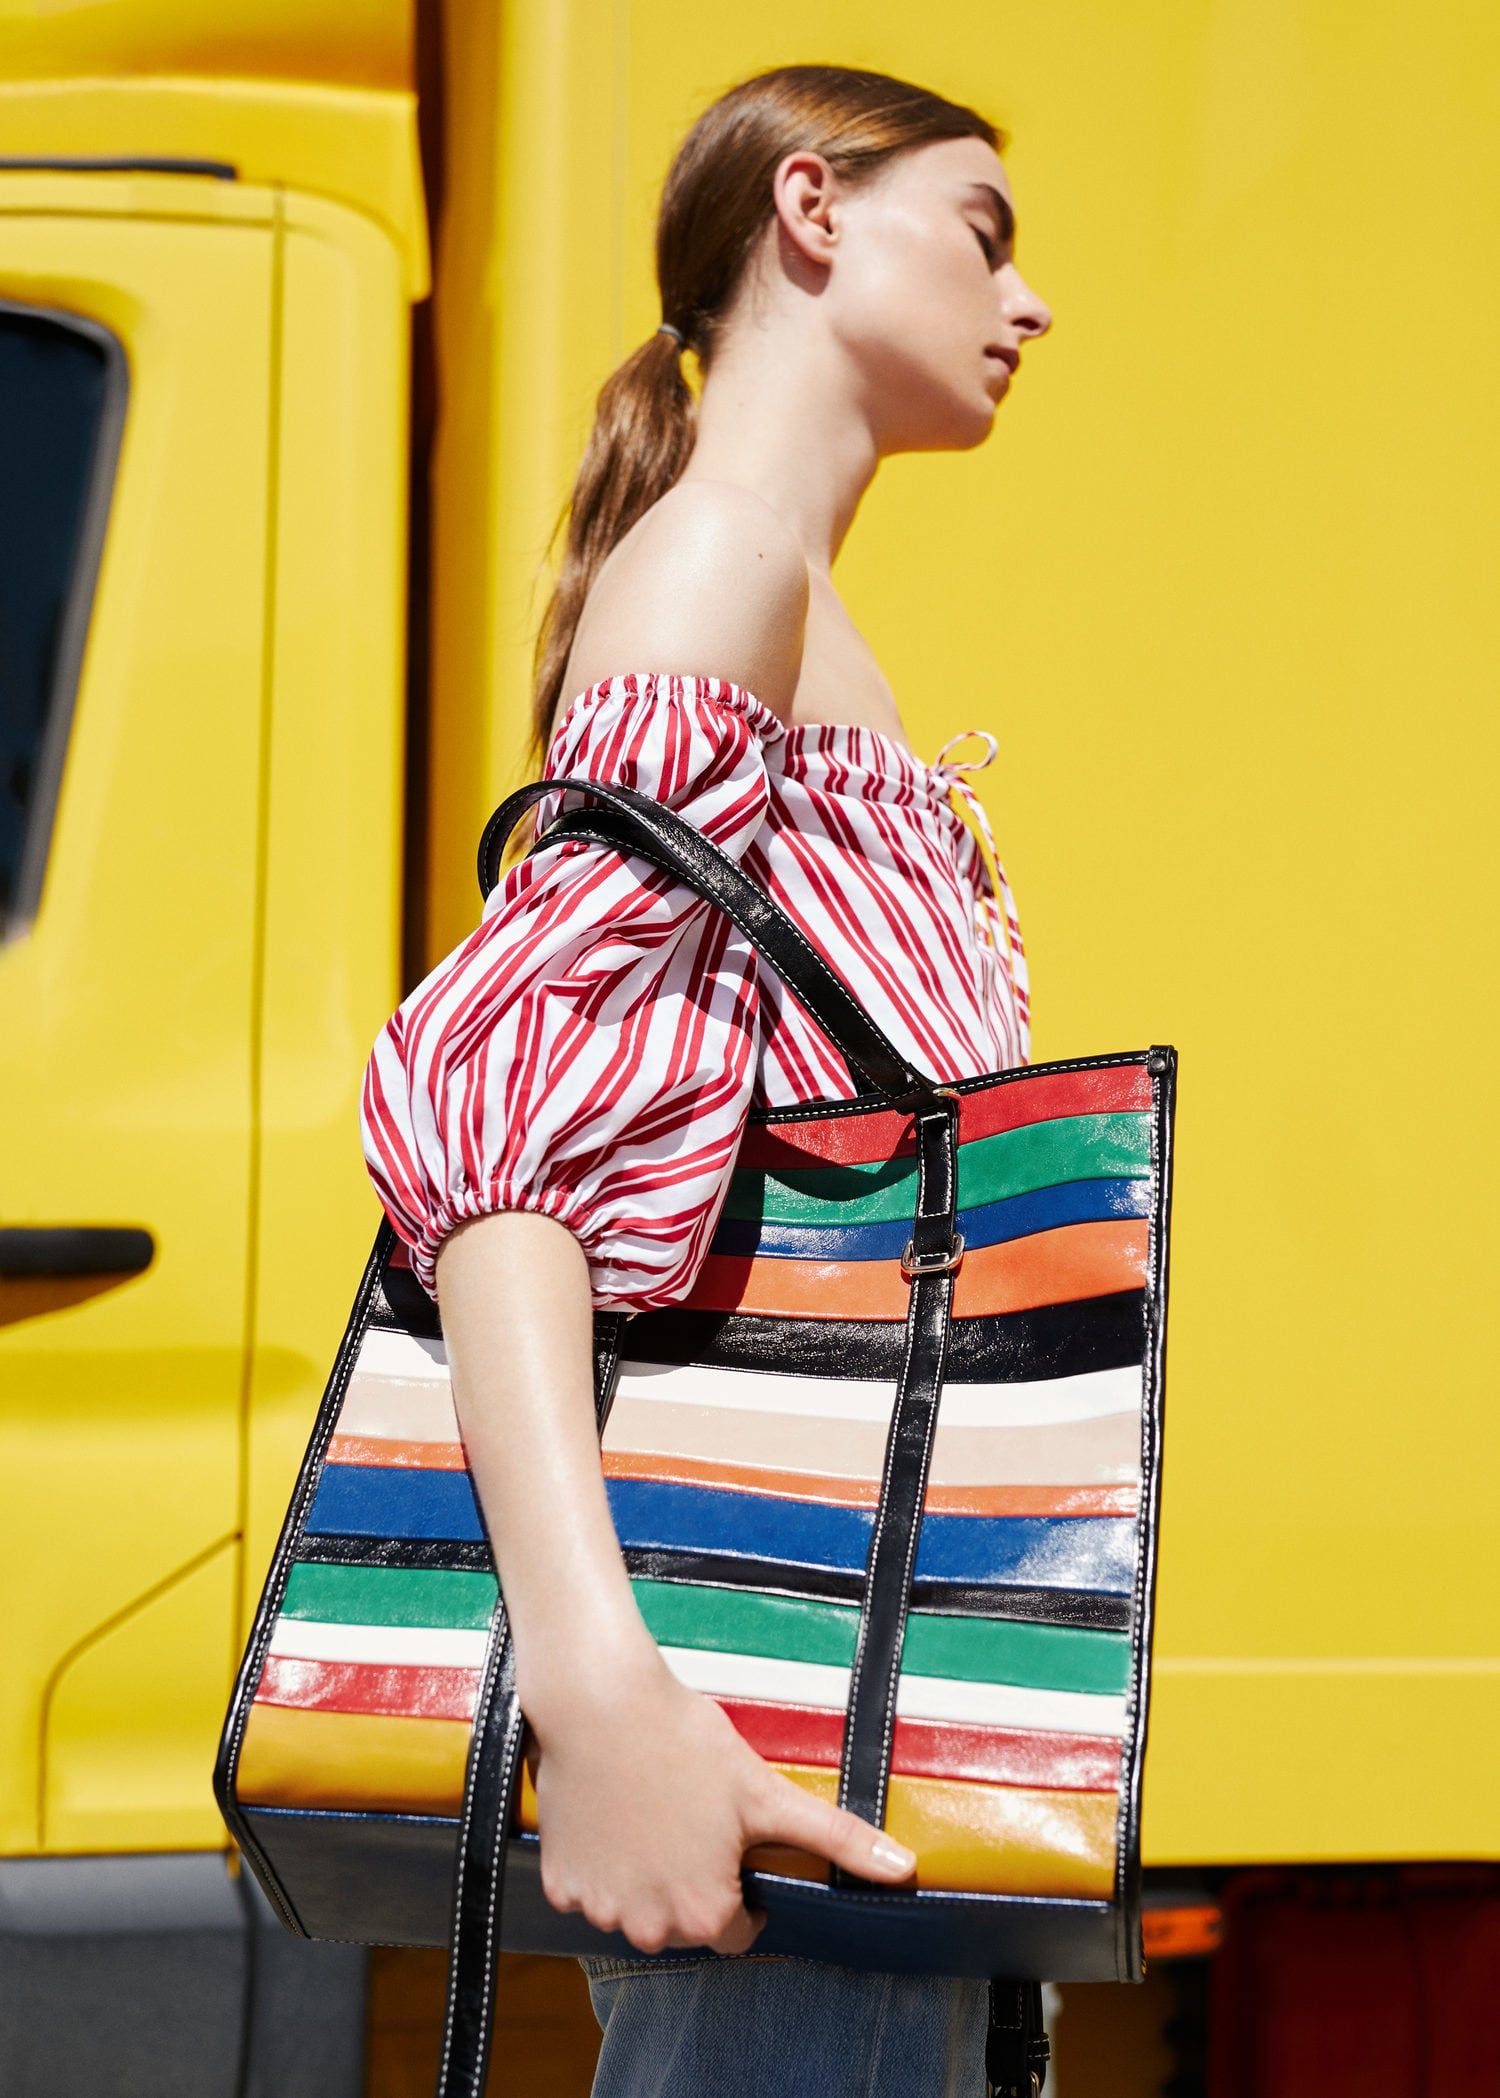 15 totes that’ll fit everything